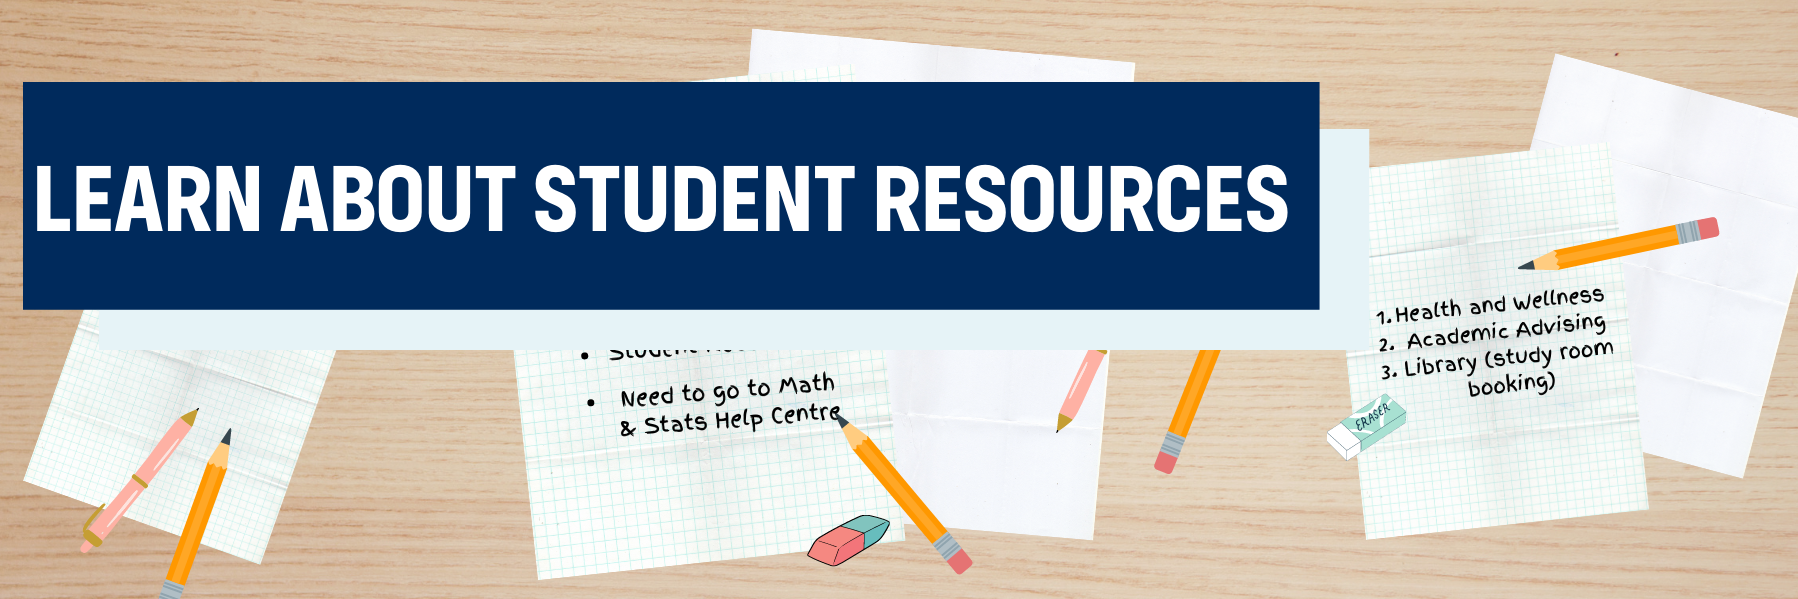 Learn About Student Resources 